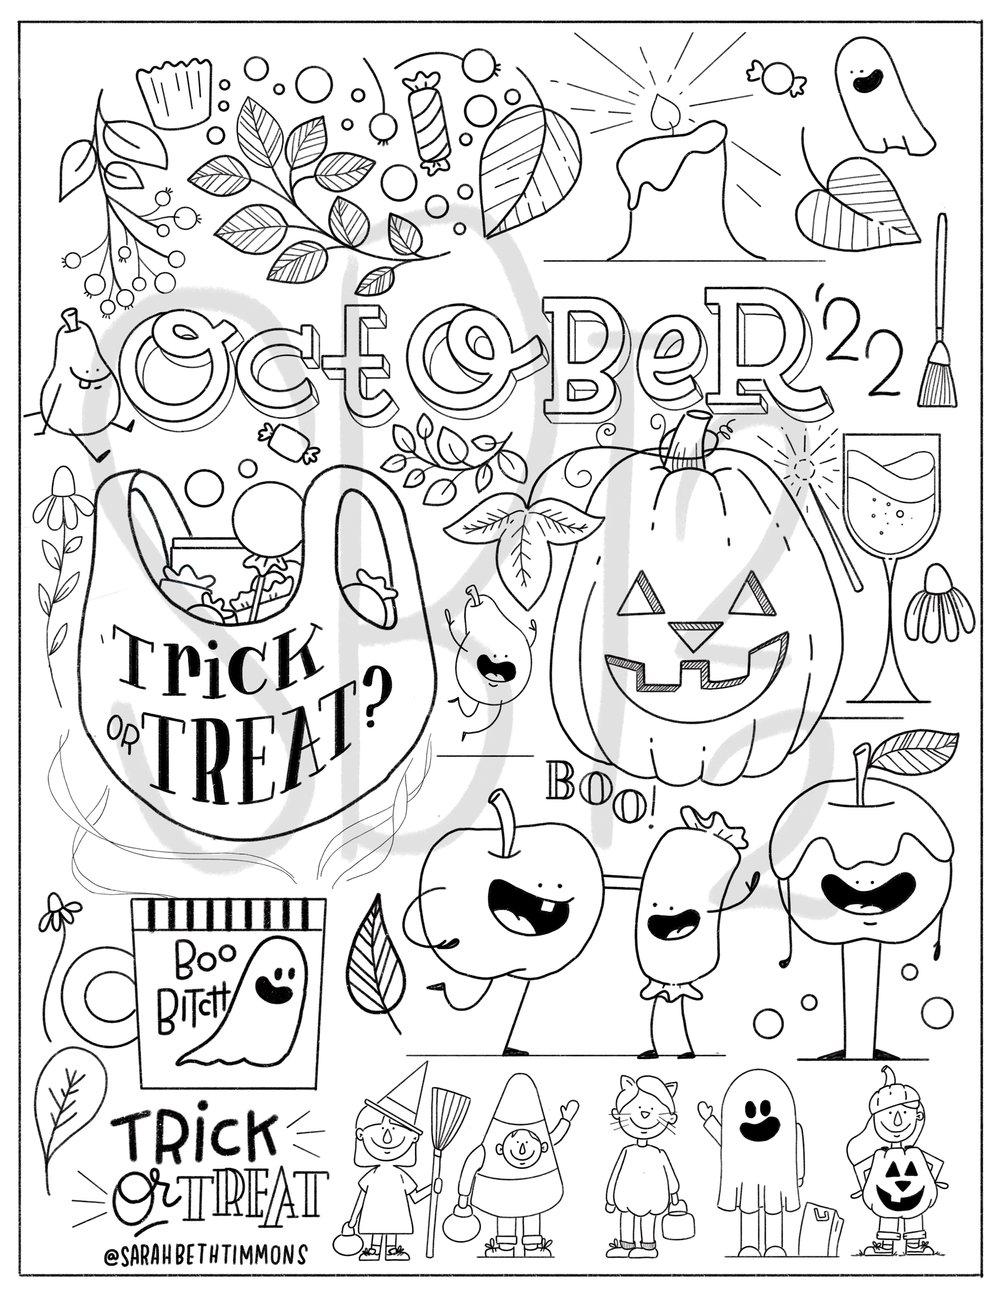 Halloween coloring page part â sarah beth timmons